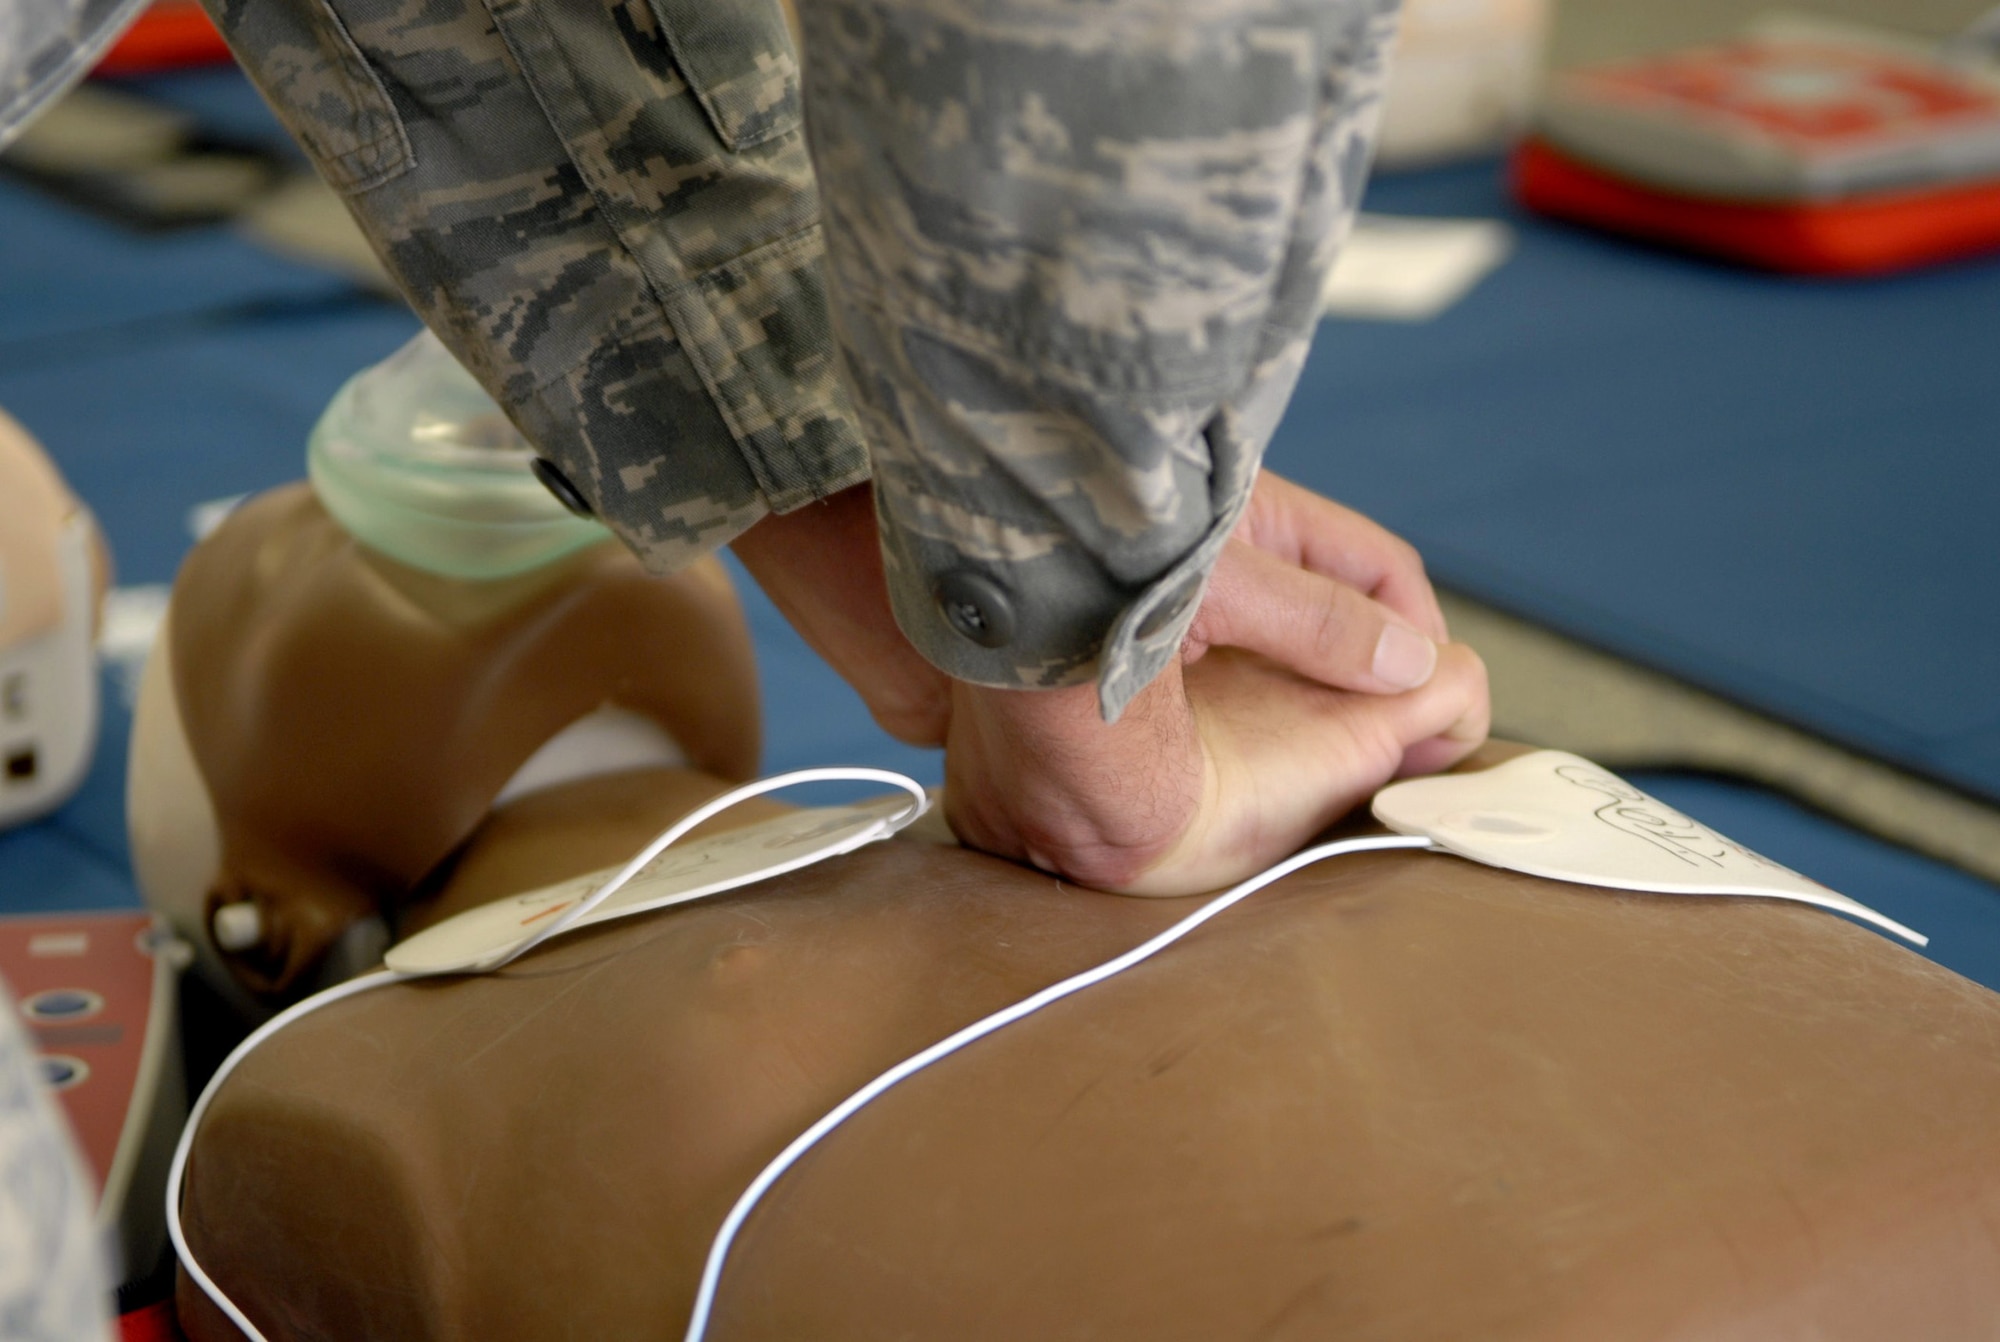 A Heartsaver student practices the new American Heart Association CPR method of circulation-airway-breathing April 15, 2011, at Kadena Air Base, Japan. (U.S. Air Force photo/Airman 1st Class Tara A. Williamson)